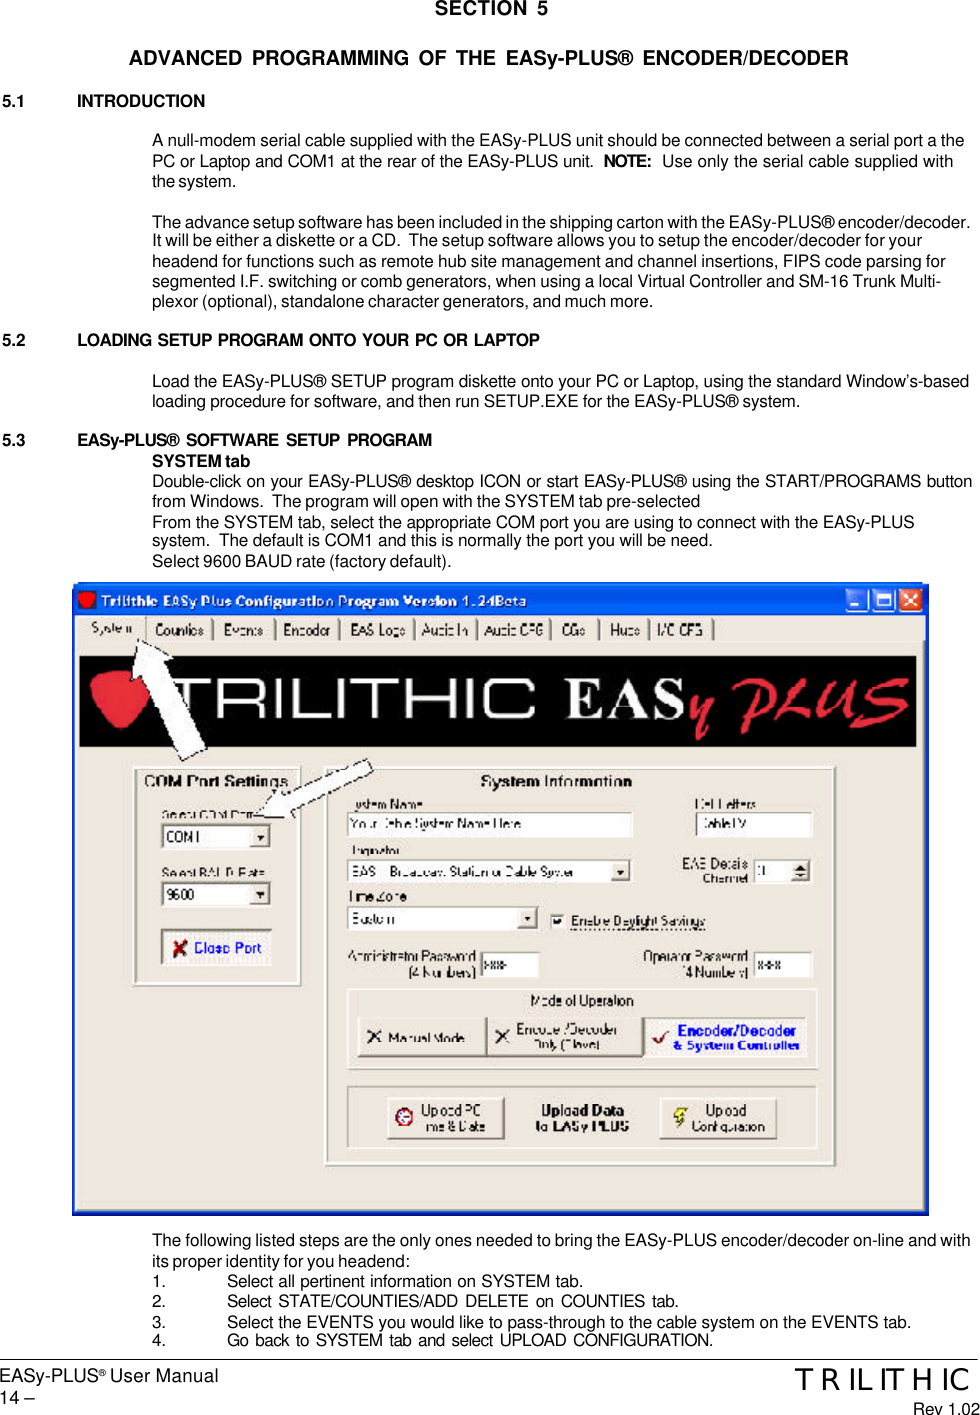 EASy-PLUS® User Manual14 – TRILITHICRev 1.02SECTION 5ADVANCED PROGRAMMING OF THE EASy-PLUS® ENCODER/DECODER5.1 INTRODUCTIONA null-modem serial cable supplied with the EASy-PLUS unit should be connected between a serial port a thePC or Laptop and COM1 at the rear of the EASy-PLUS unit.  NOTE:  Use only the serial cable supplied withthe system.The advance setup software has been included in the shipping carton with the EASy-PLUS® encoder/decoder.It will be either a diskette or a CD.  The setup software allows you to setup the encoder/decoder for yourheadend for functions such as remote hub site management and channel insertions, FIPS code parsing forsegmented I.F. switching or comb generators, when using a local Virtual Controller and SM-16 Trunk Multi-plexor (optional), standalone character generators, and much more.5.2 LOADING SETUP PROGRAM ONTO YOUR PC OR LAPTOPLoad the EASy-PLUS® SETUP program diskette onto your PC or Laptop, using the standard Window’s-basedloading procedure for software, and then run SETUP.EXE for the EASy-PLUS® system.5.3 EASy-PLUS® SOFTWARE SETUP PROGRAMSYSTEM tabDouble-click on your EASy-PLUS® desktop ICON or start EASy-PLUS® using the START/PROGRAMS buttonfrom Windows.  The program will open with the SYSTEM tab pre-selectedFrom the SYSTEM tab, select the appropriate COM port you are using to connect with the EASy-PLUSsystem.  The default is COM1 and this is normally the port you will be need.Select 9600 BAUD rate (factory default).The following listed steps are the only ones needed to bring the EASy-PLUS encoder/decoder on-line and withits proper identity for you headend:1. Select all pertinent information on SYSTEM tab.2. Select STATE/COUNTIES/ADD DELETE on COUNTIES tab.3. Select the EVENTS you would like to pass-through to the cable system on the EVENTS tab.4. Go back to SYSTEM tab and select UPLOAD CONFIGURATION.